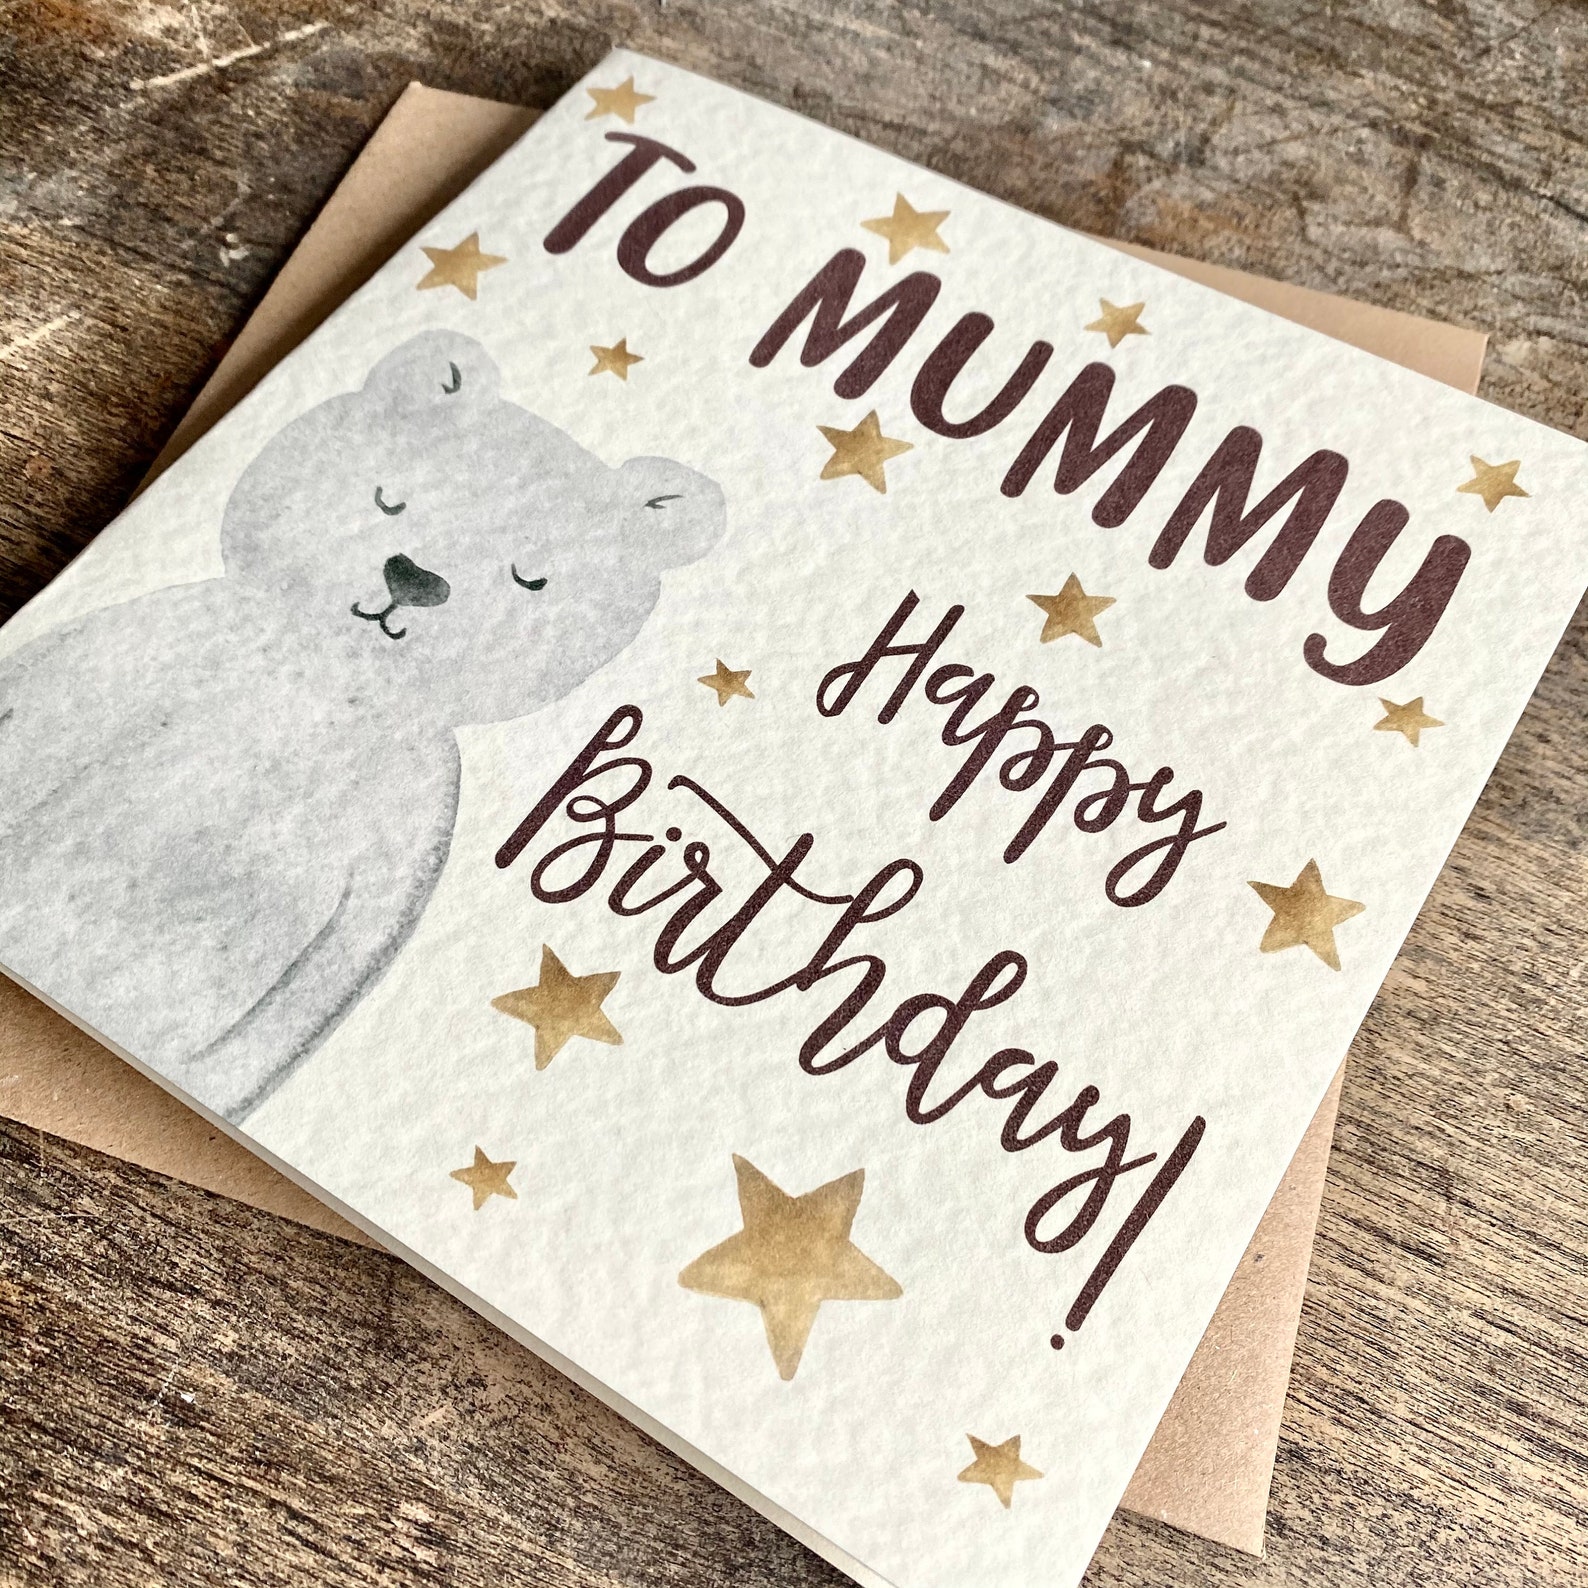 mummy-birthday-card-from-your-children-card-for-mummy-happy-etsy